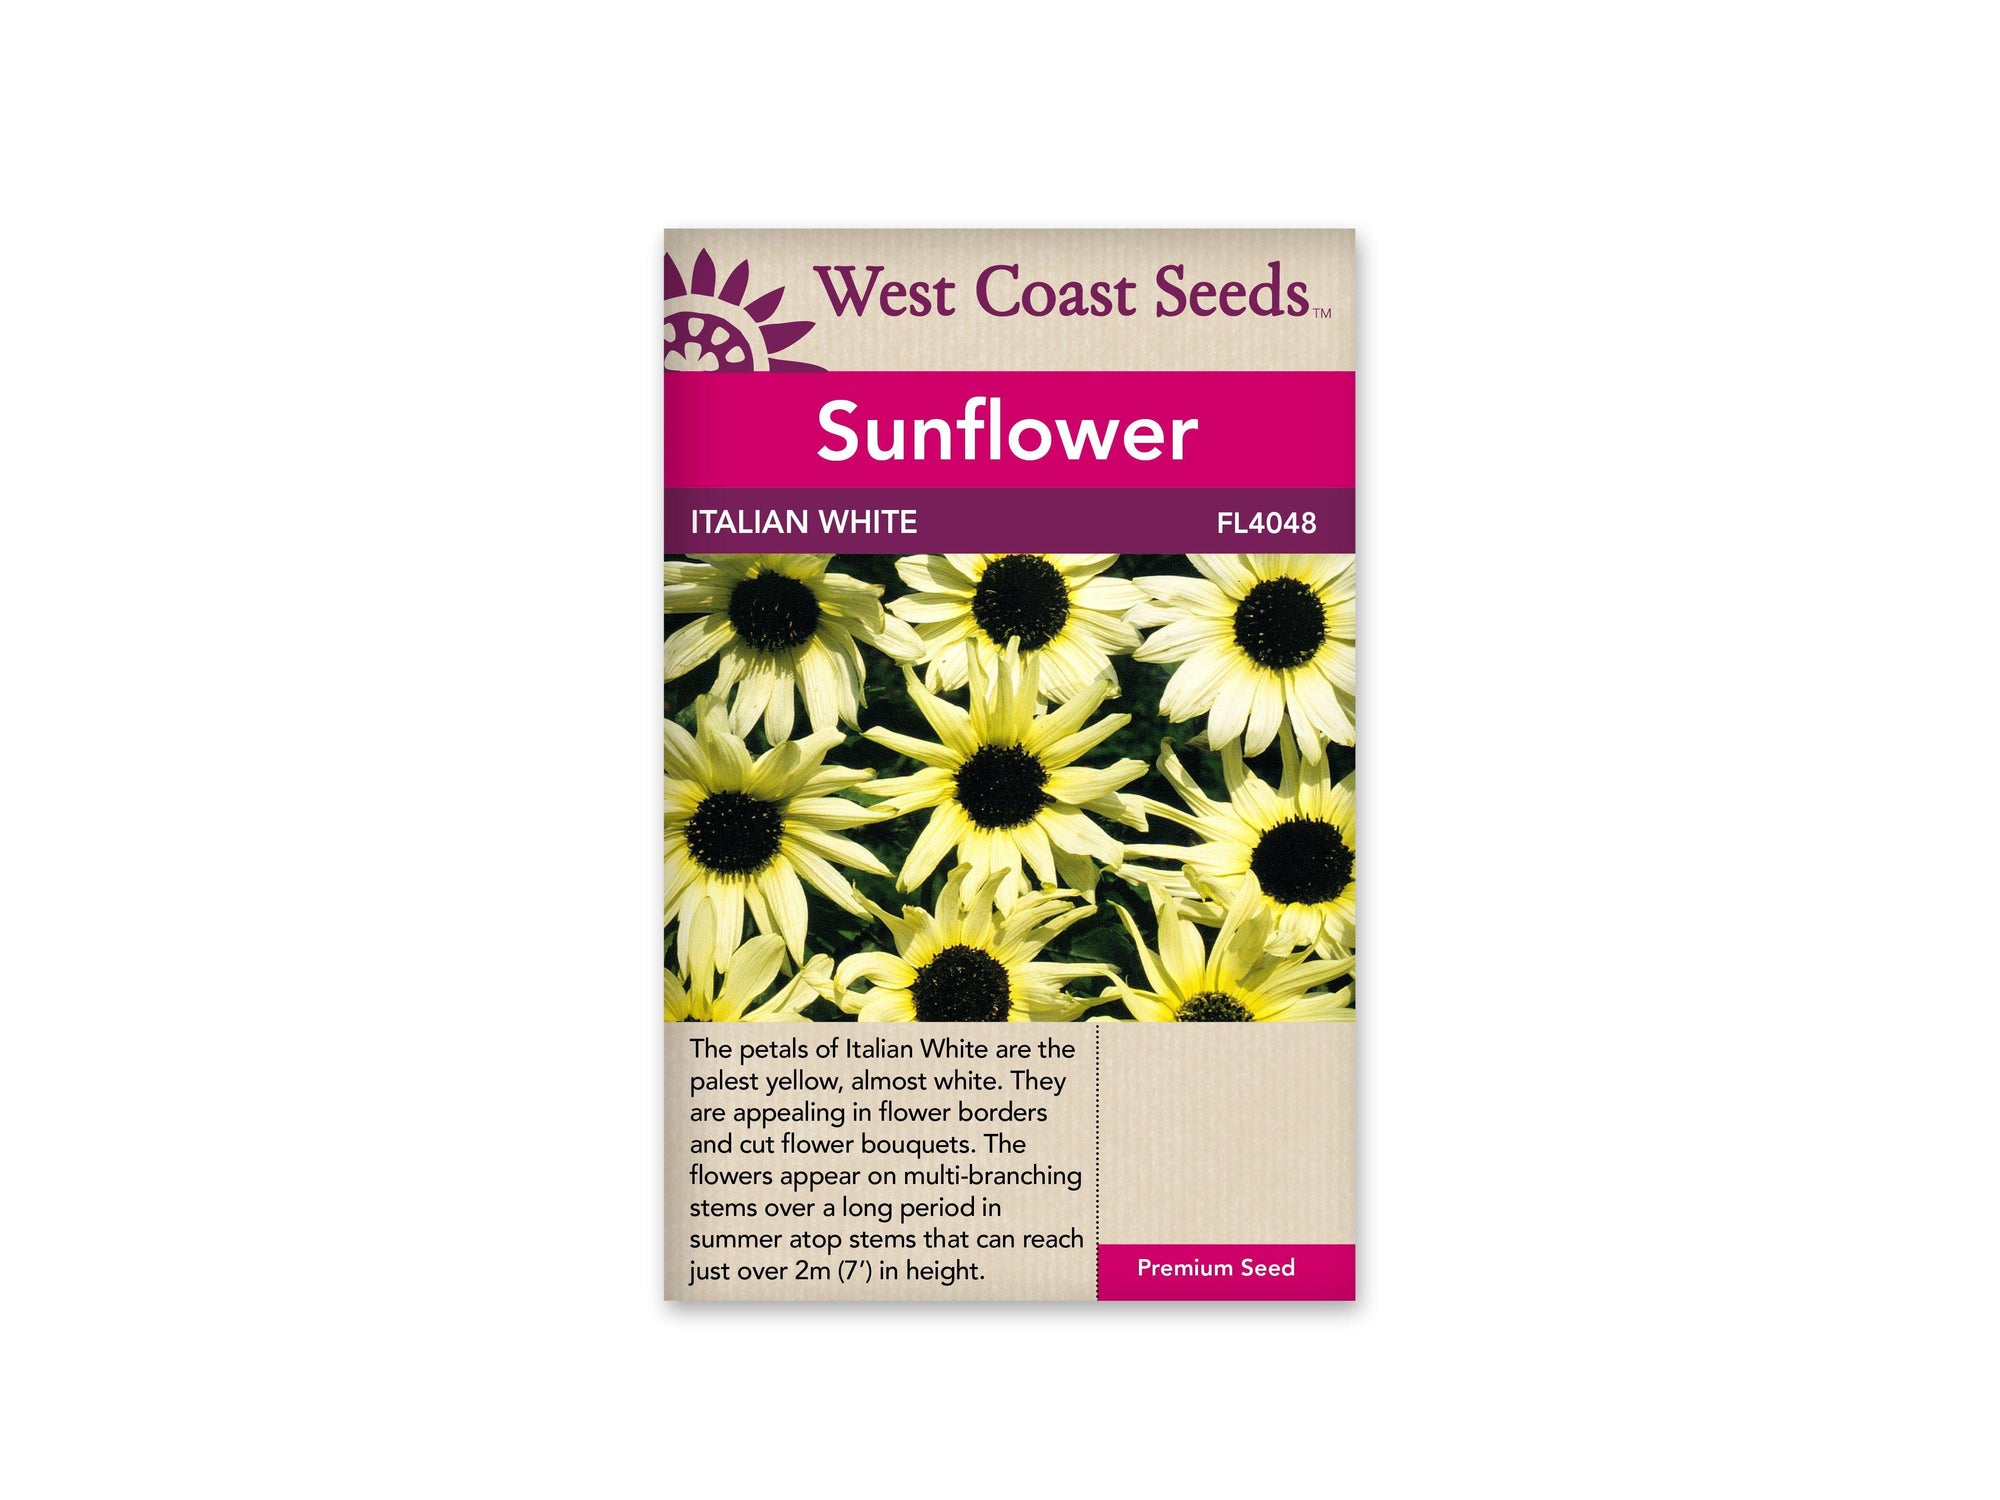 Introducing Sunflower Italian White - a majestic addition to any garden or landscape. Blossoms reach over 2m in height in 100 days, painted in pale yellow almost-white. Preferred full sun exposure lets it thrive in bright, sunny locations, an eye-catching and vibrant touch to your outdoor space.